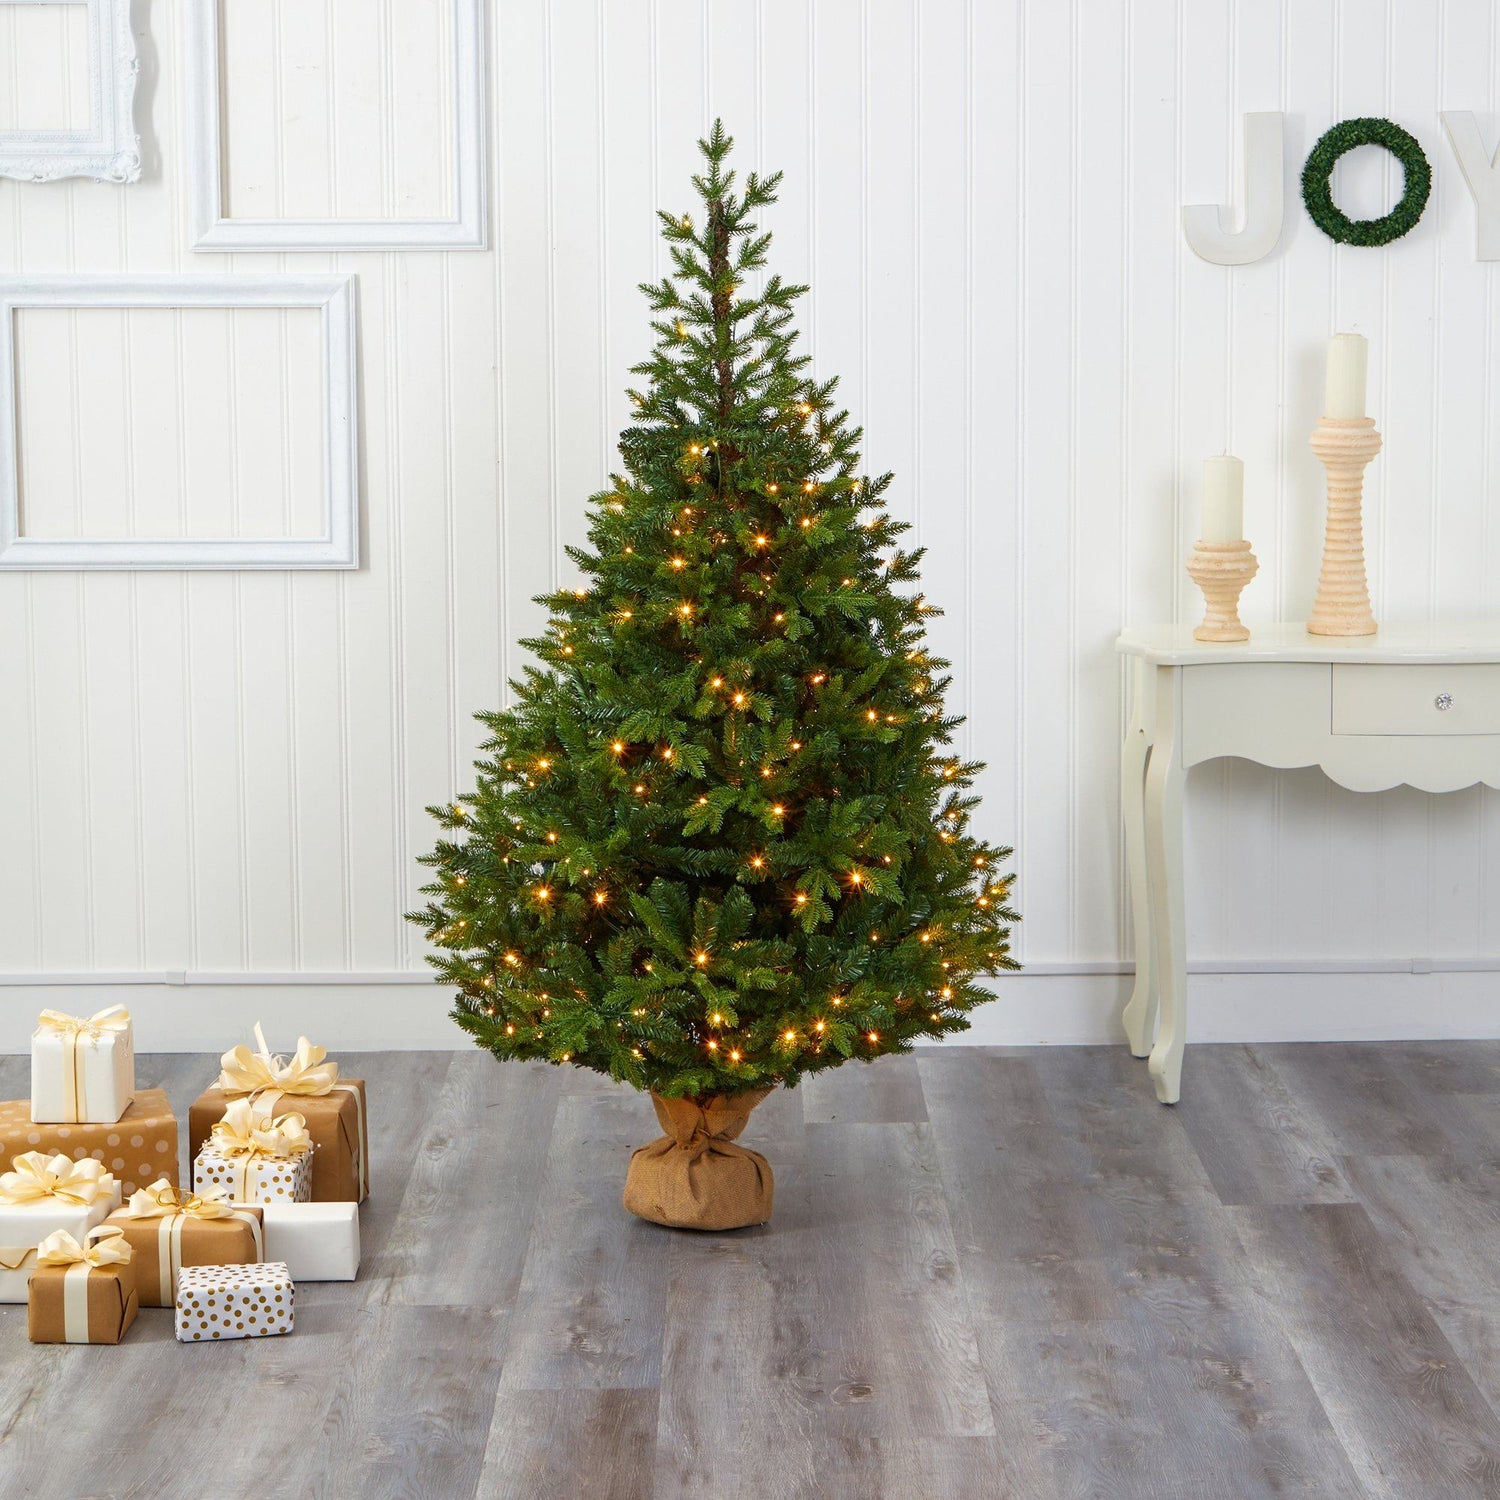 6’ Fraser Fir “Natural Look” Artificial Christmas Tree with 300 Clear LED Lights, a Burlap Base and 2113 Bendable Branches